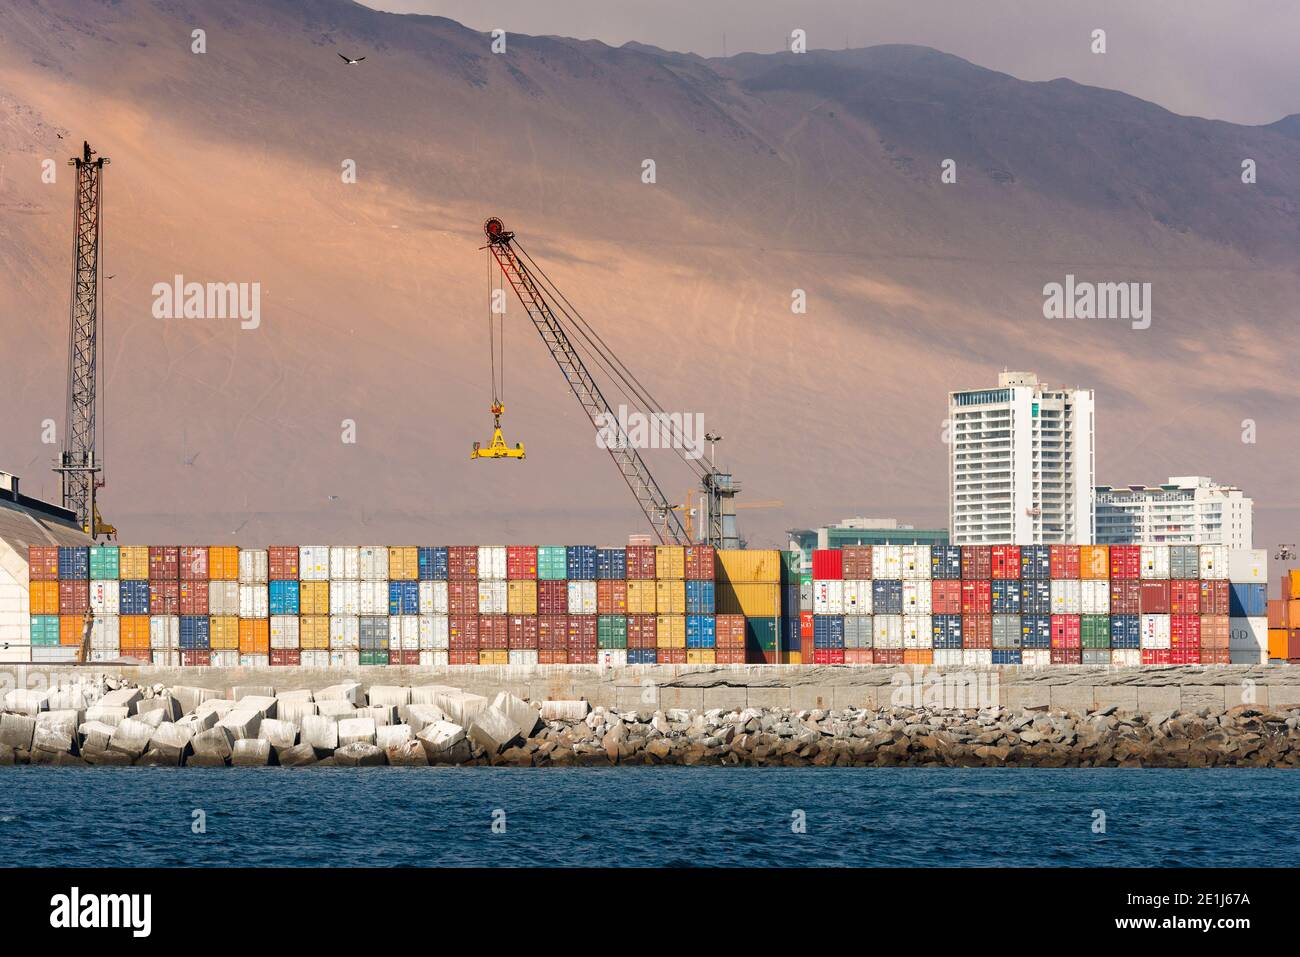 Iquique, Regio de Tarapaca; Chile - View of container stack at the port of Iquique in northern Chile. Stock Photo